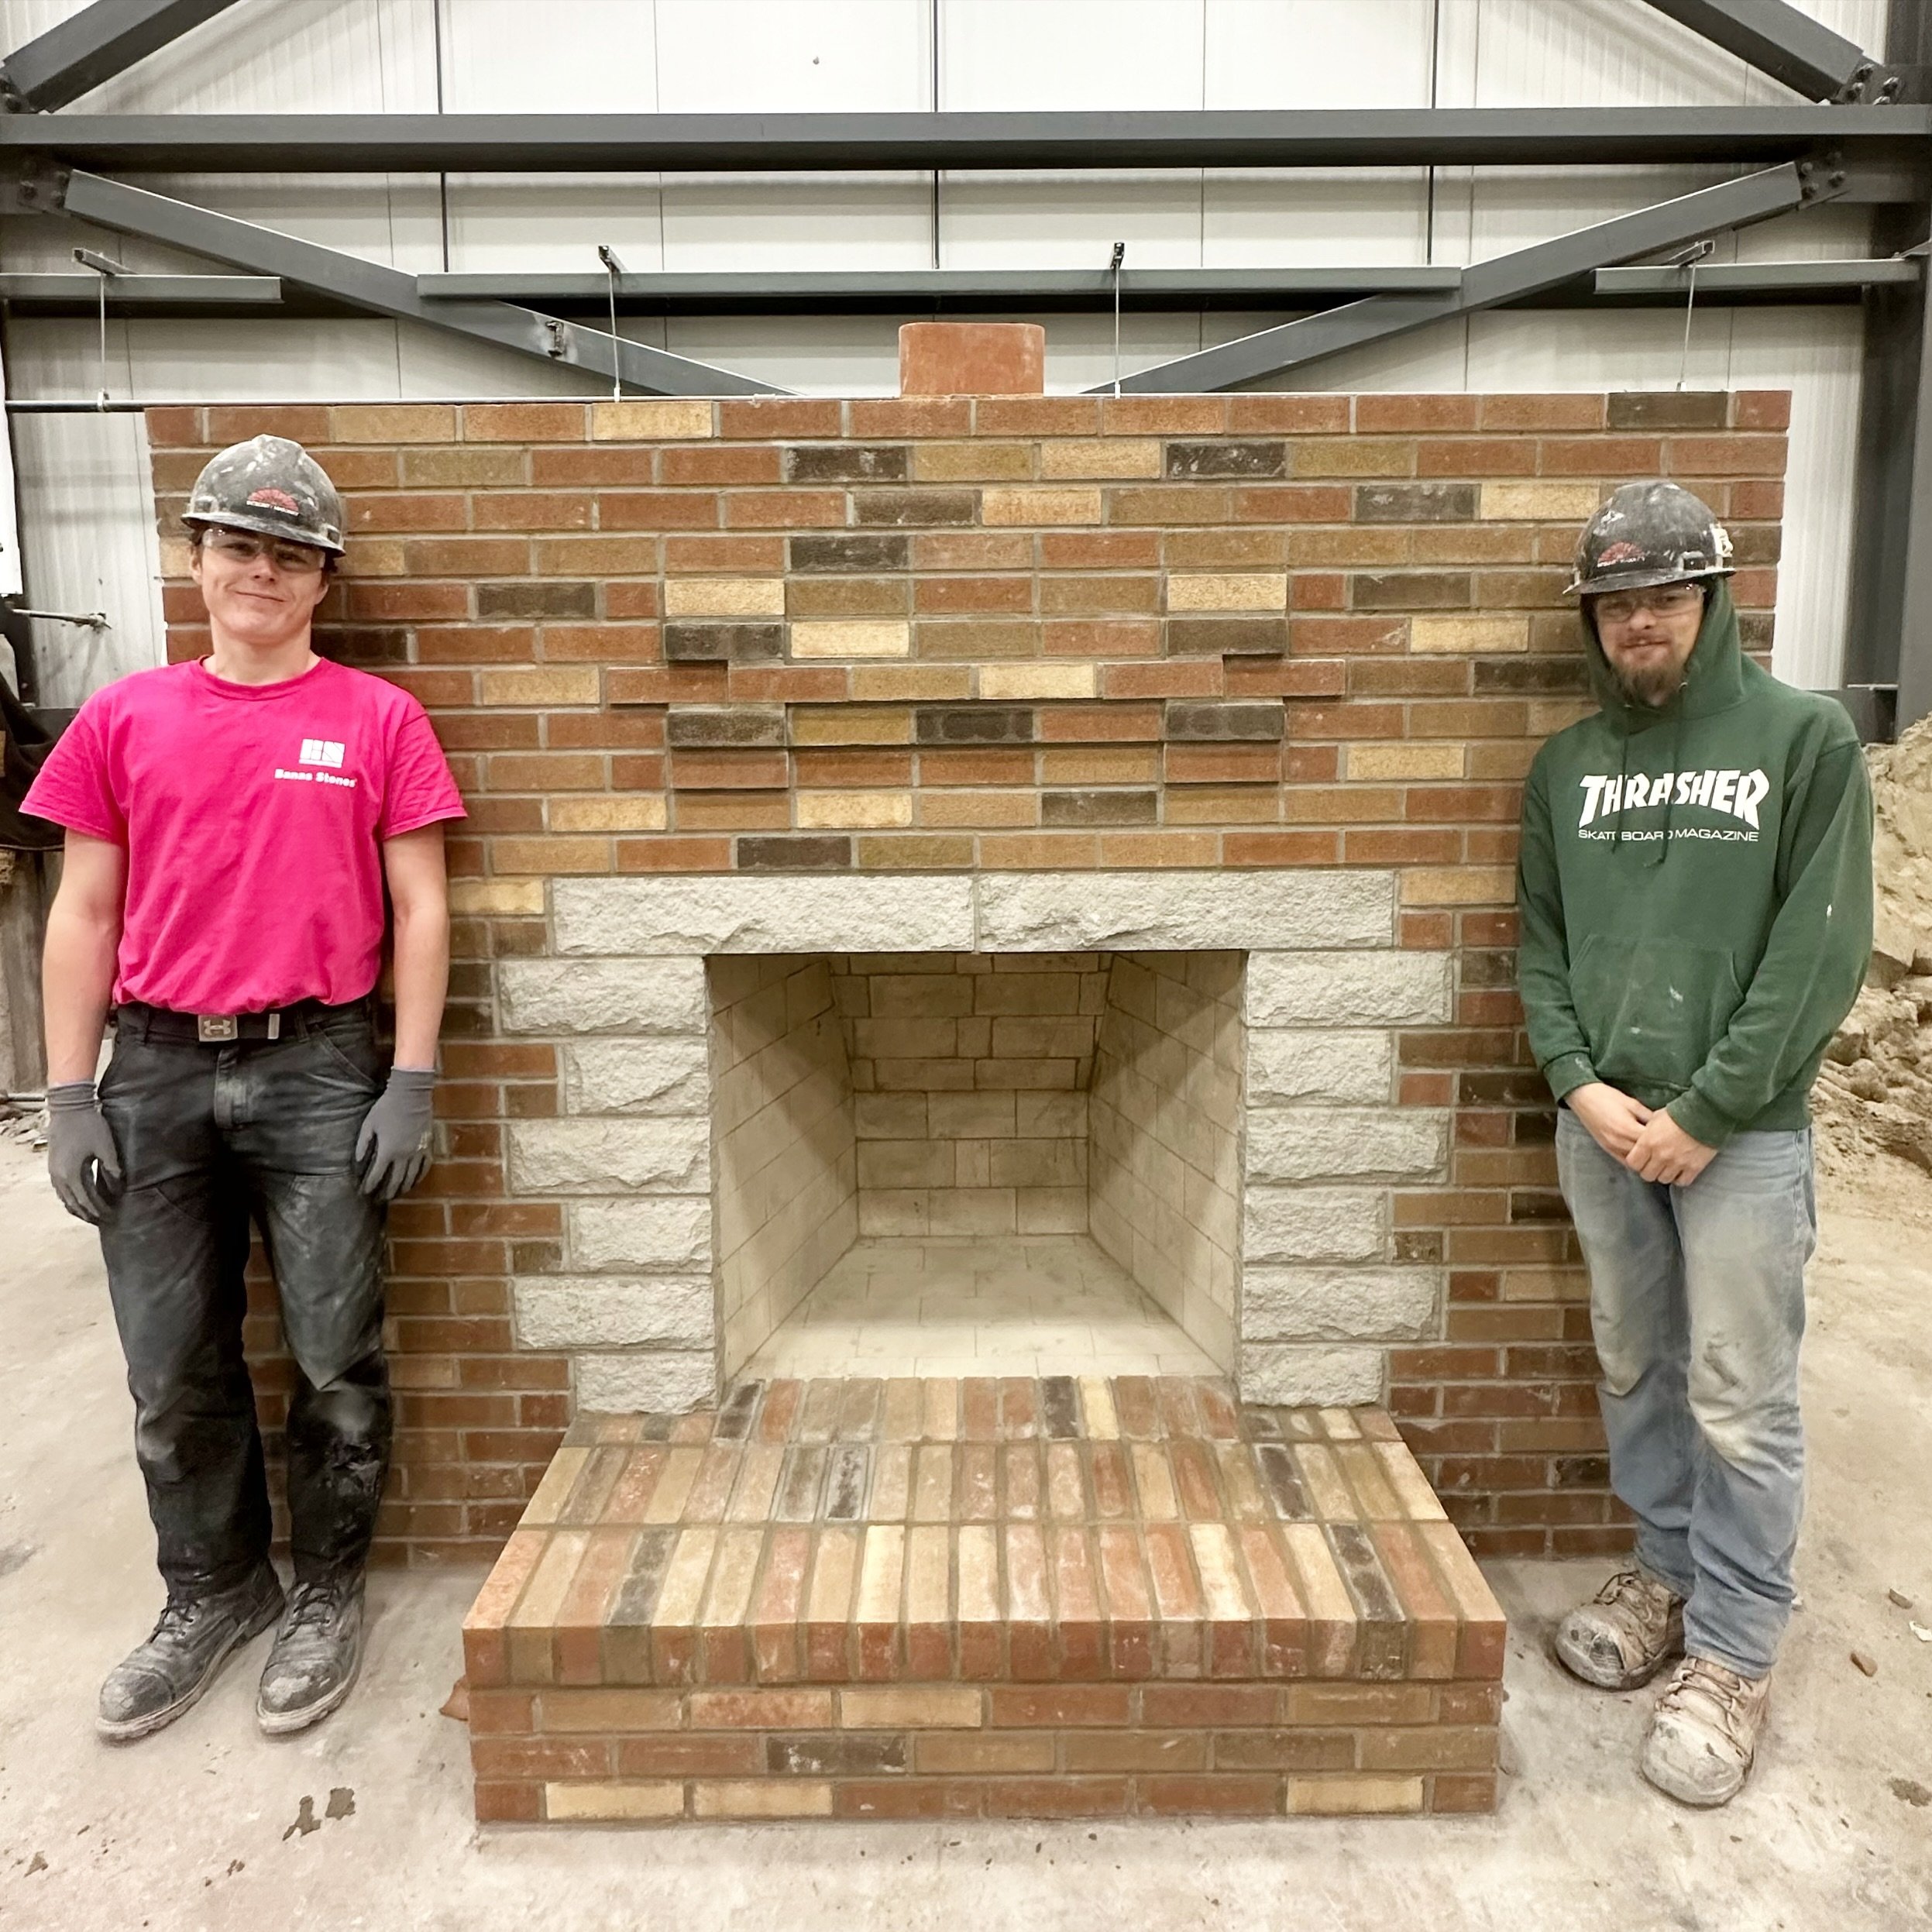 Warmest congratulations to Integrity apprentices, Ryan and Nicholas, for having completed their 3rd and final apprenticeship training course at the Ontario Masonry Training Centre, Ottawa Campus. @omtc350mi 

Their final project, a fully functional m